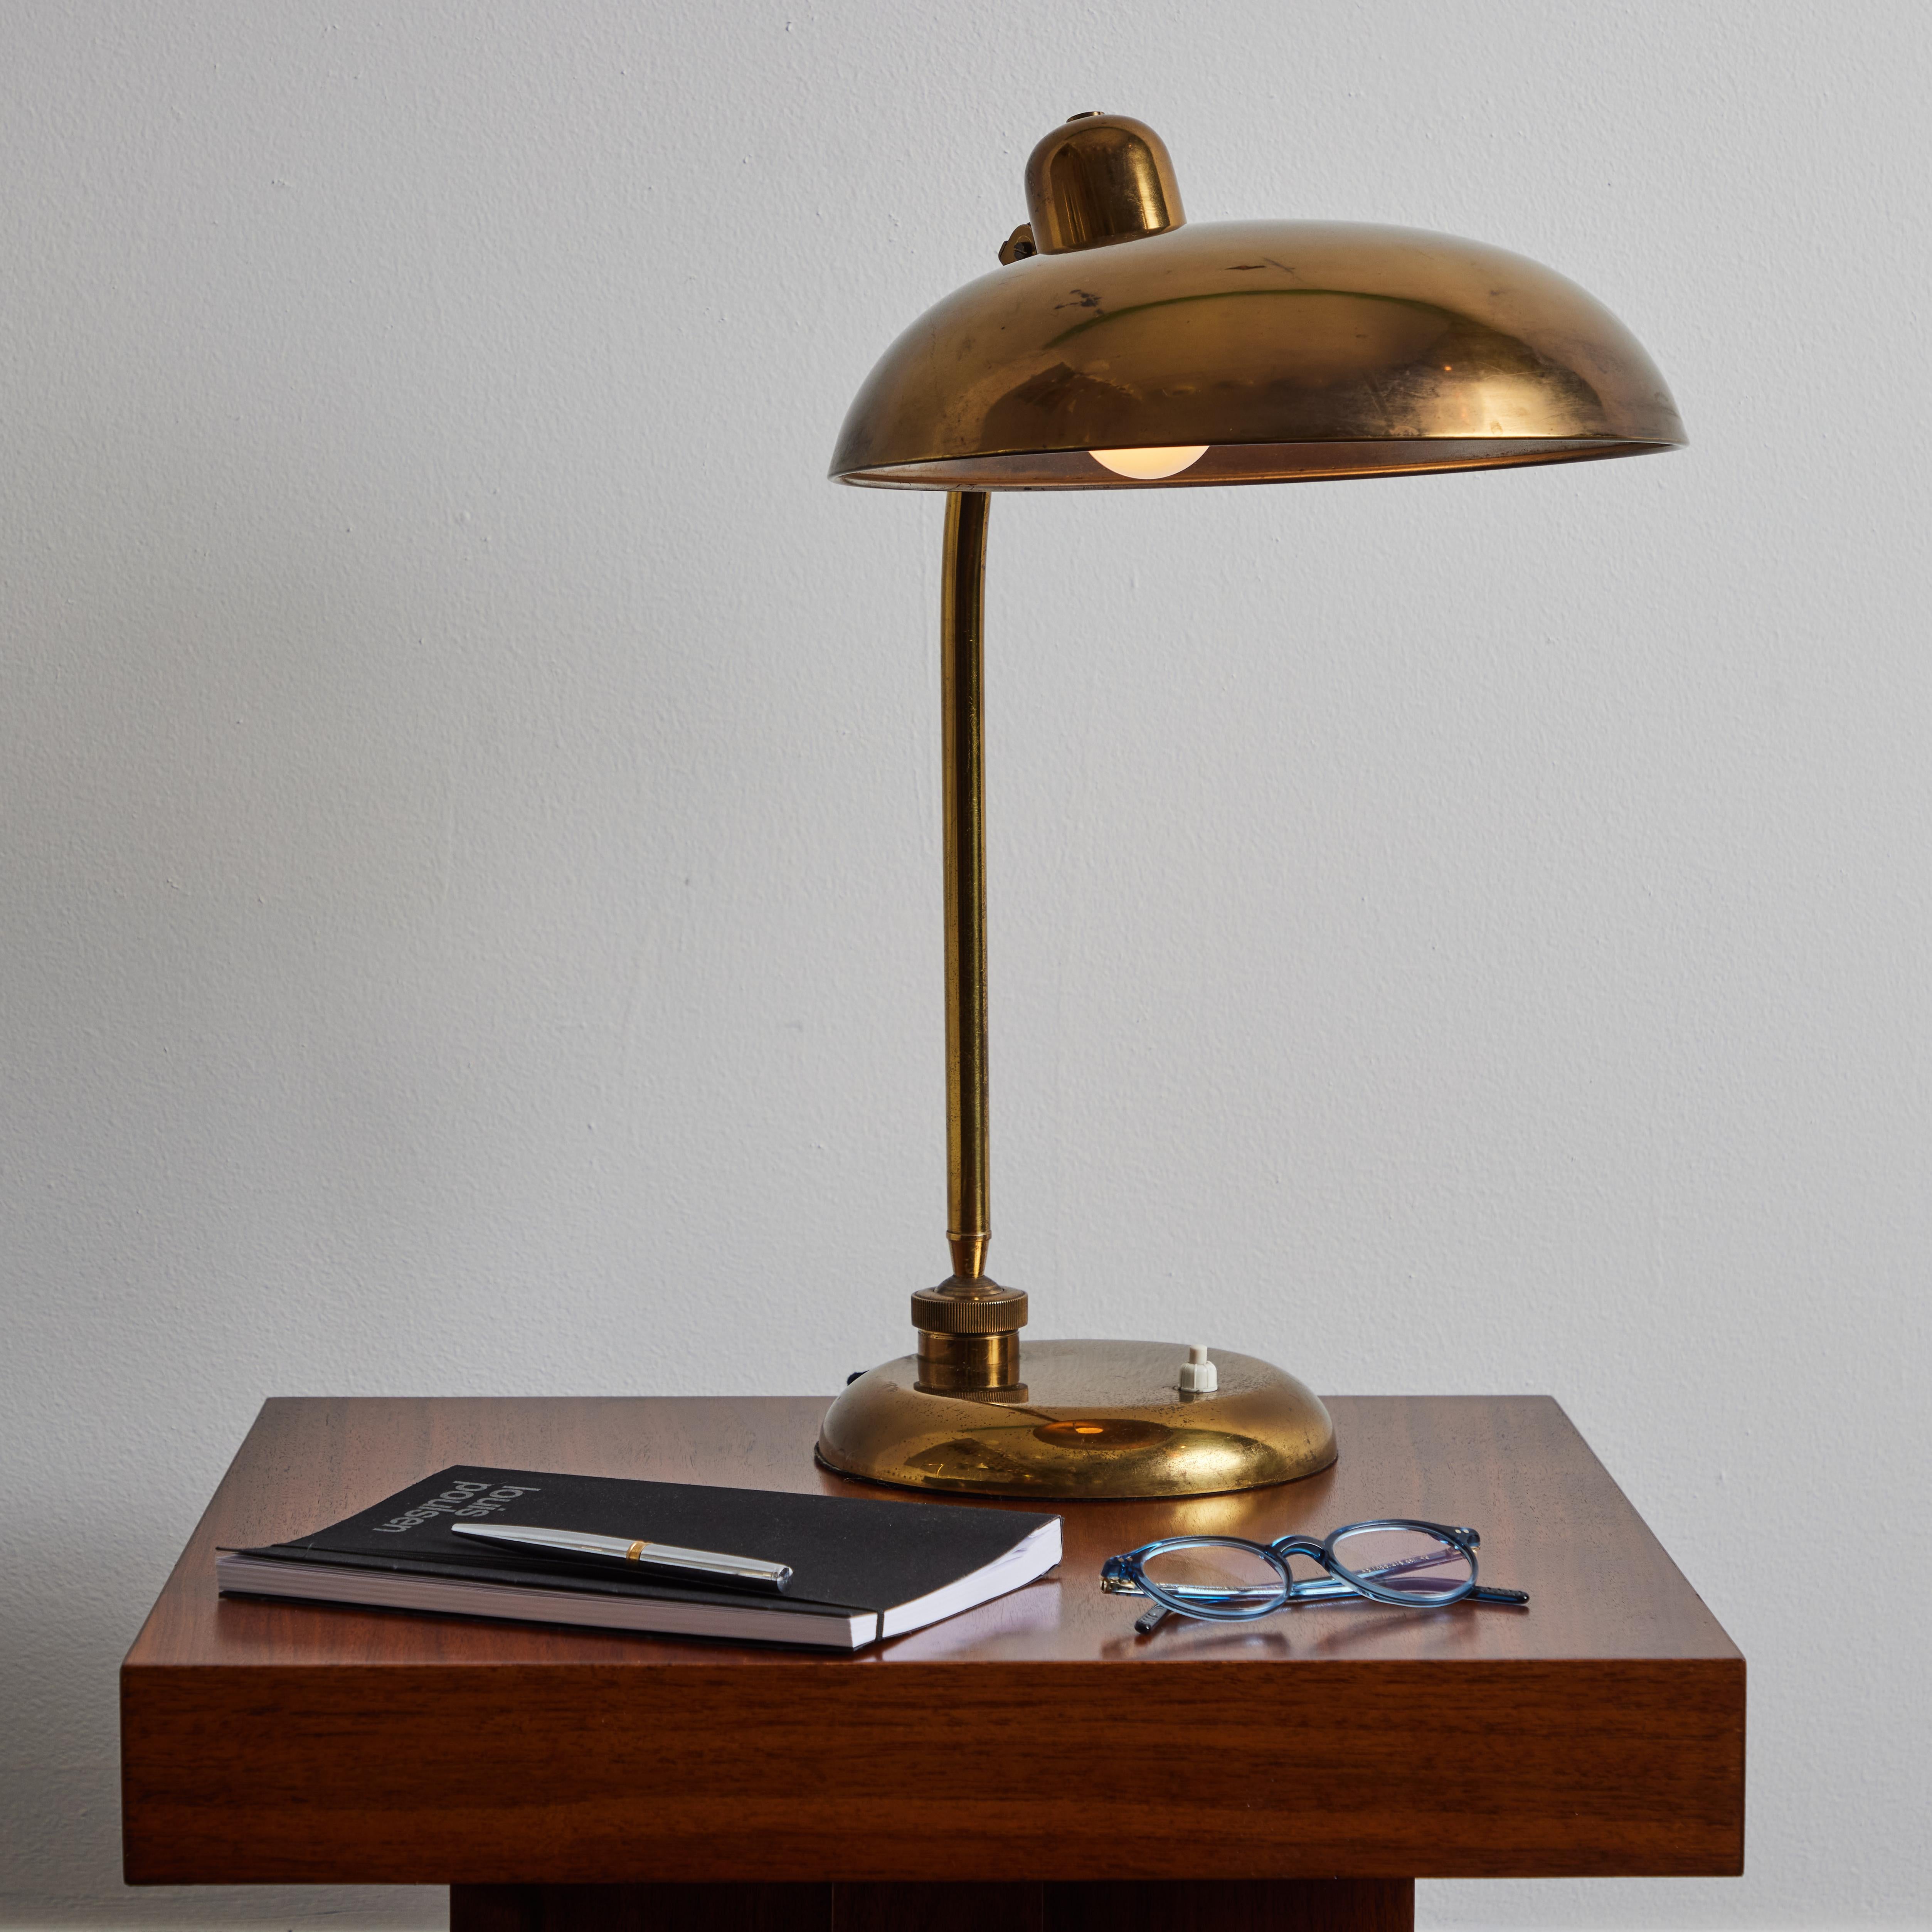 Scandinavian Modern 1940s Giovanni Michelucci Patinated Brass Ministerial Table Lamp for Lariolux For Sale